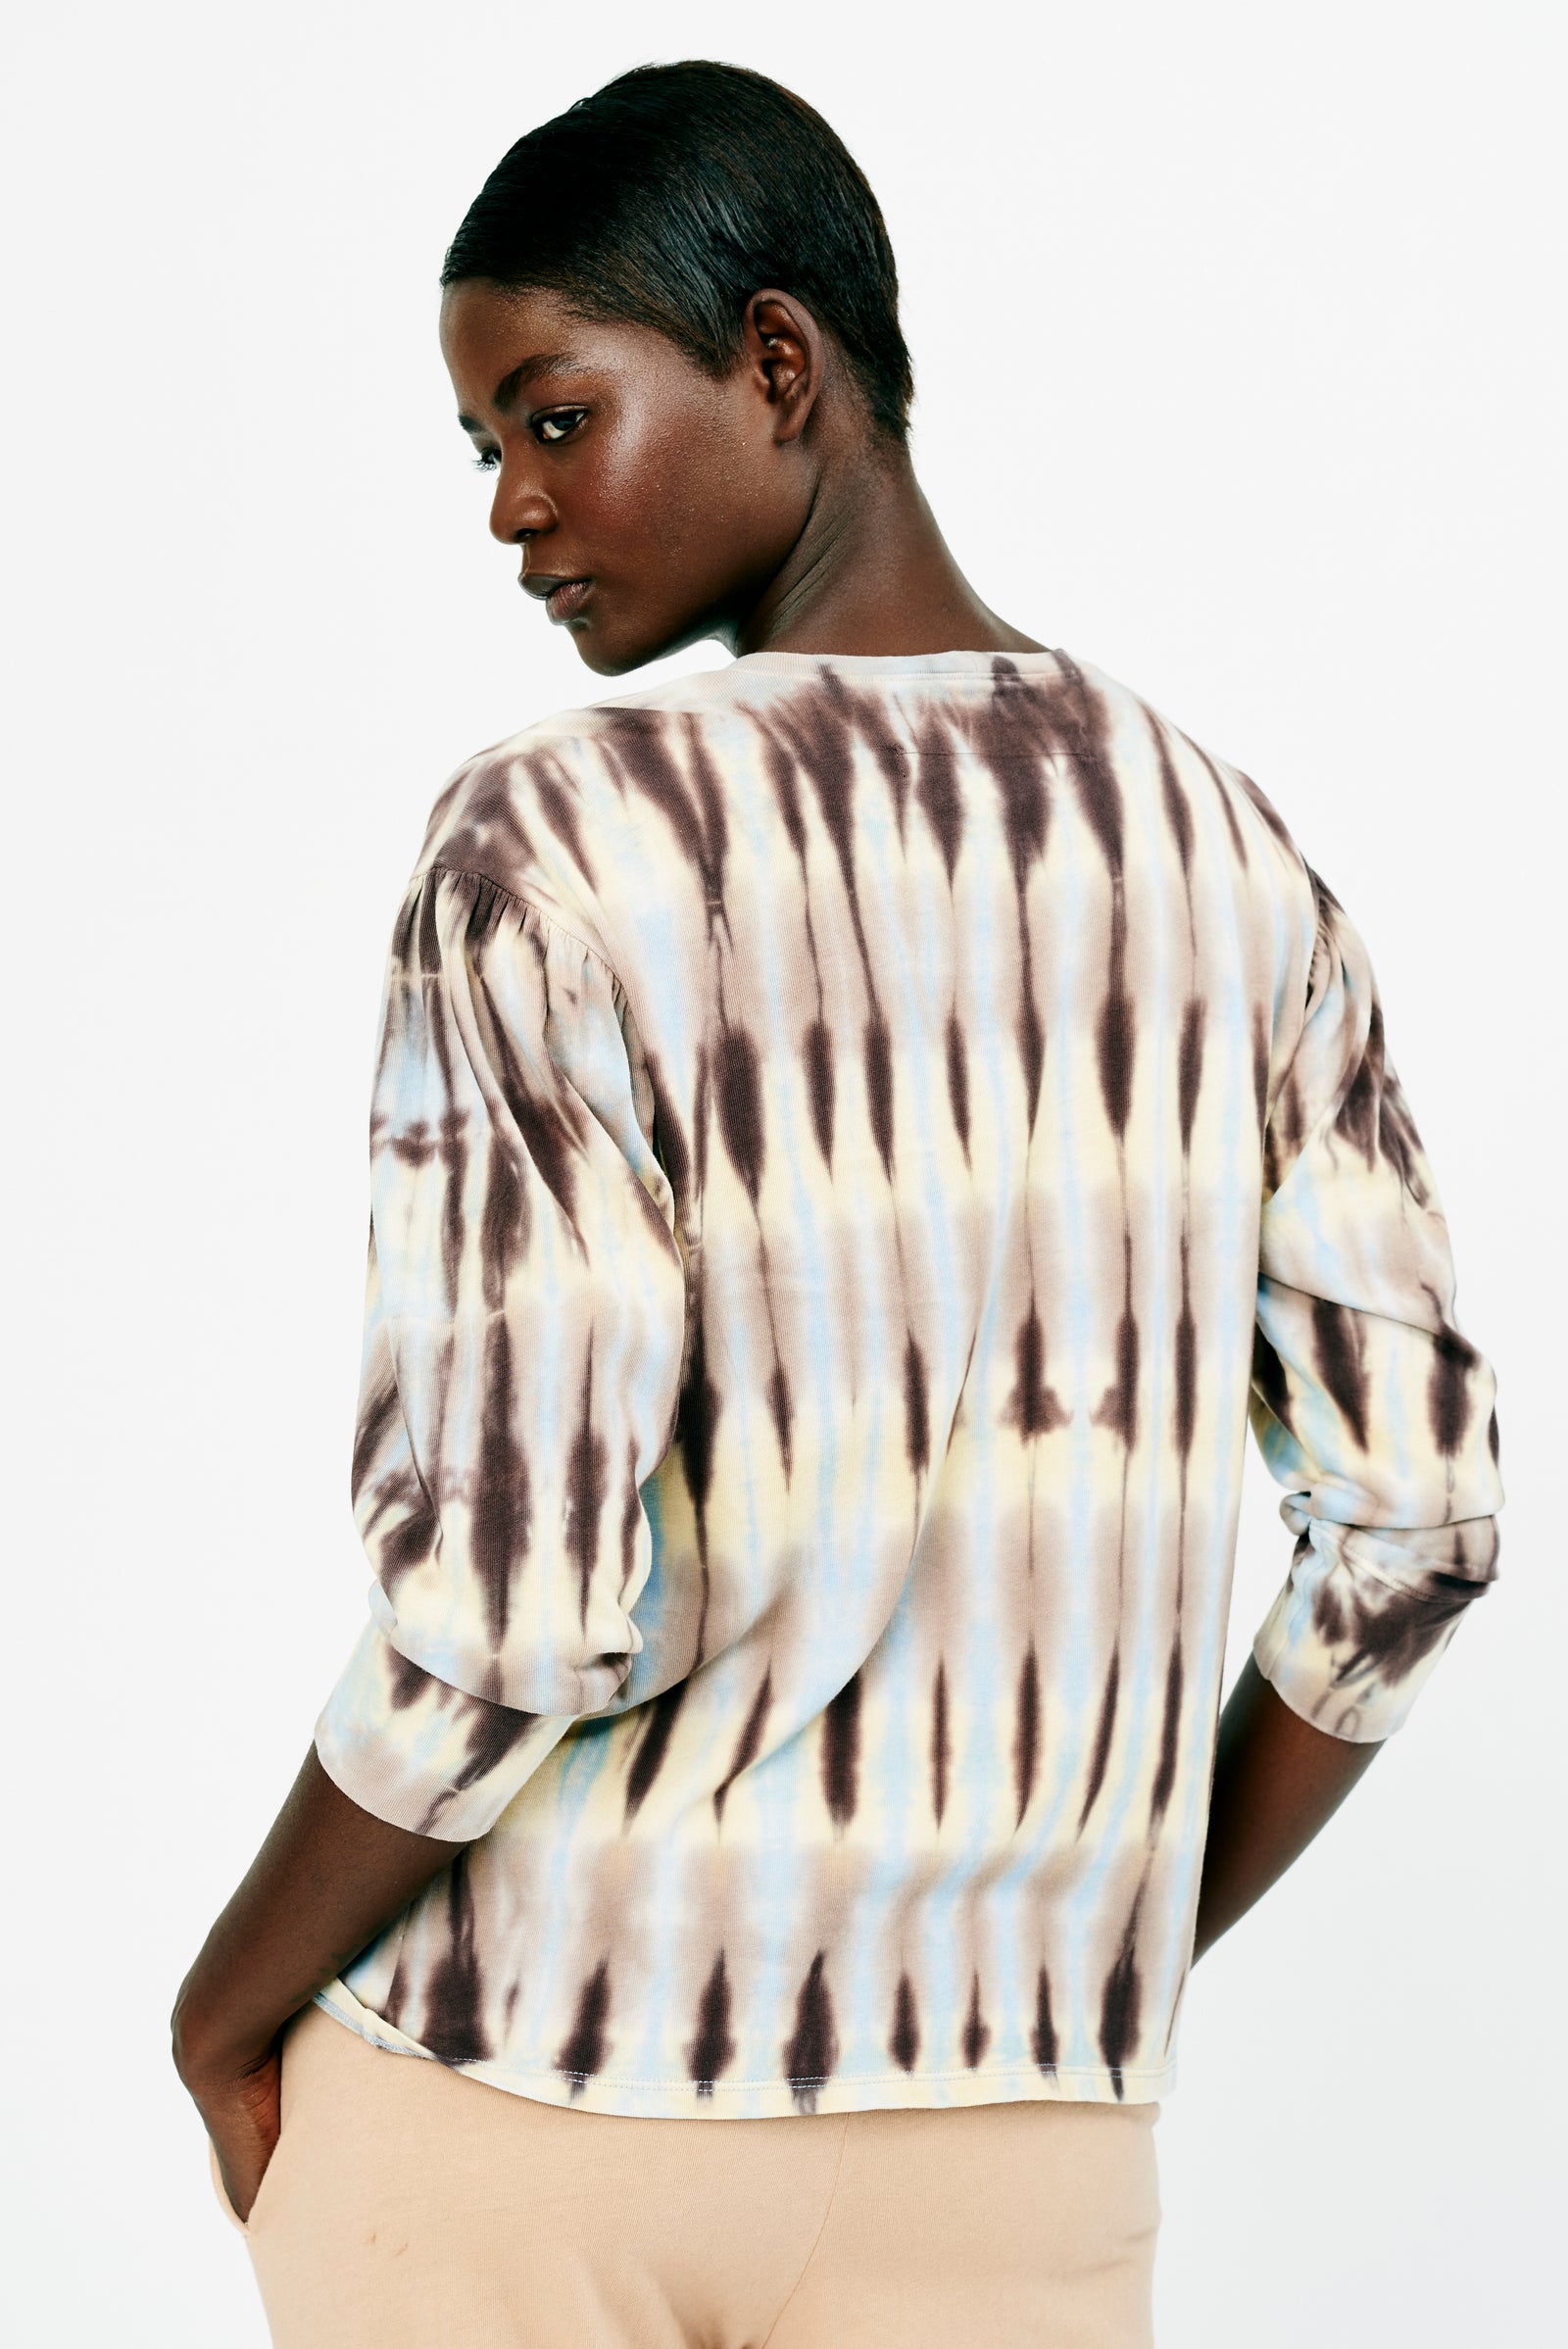 Grey Hills Forms Tie Dye Classic Jersey Simone Sleeve Top Back Close-Up View